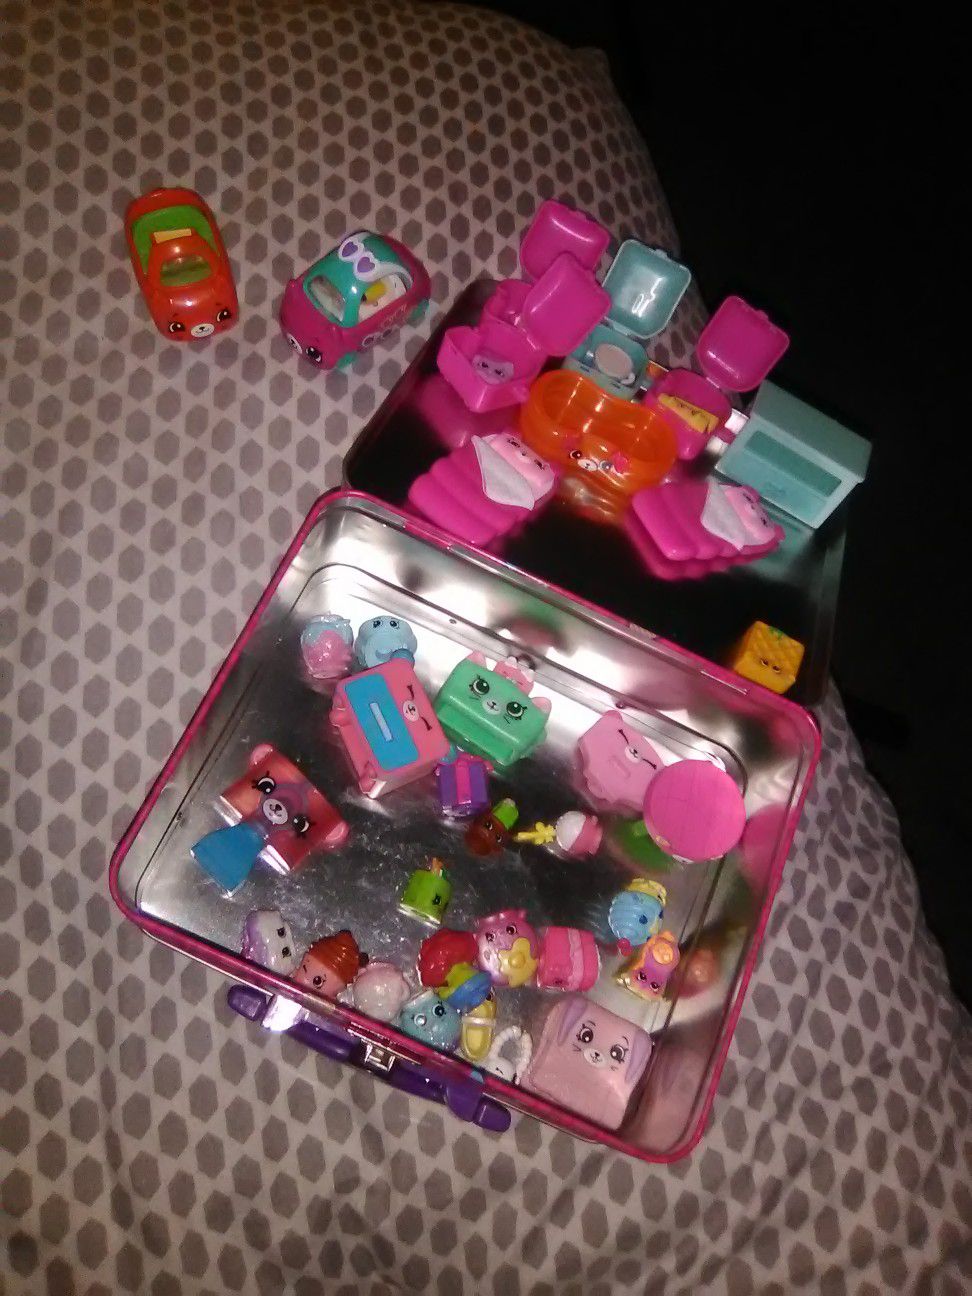 Shopkins lunchbox with shopkins